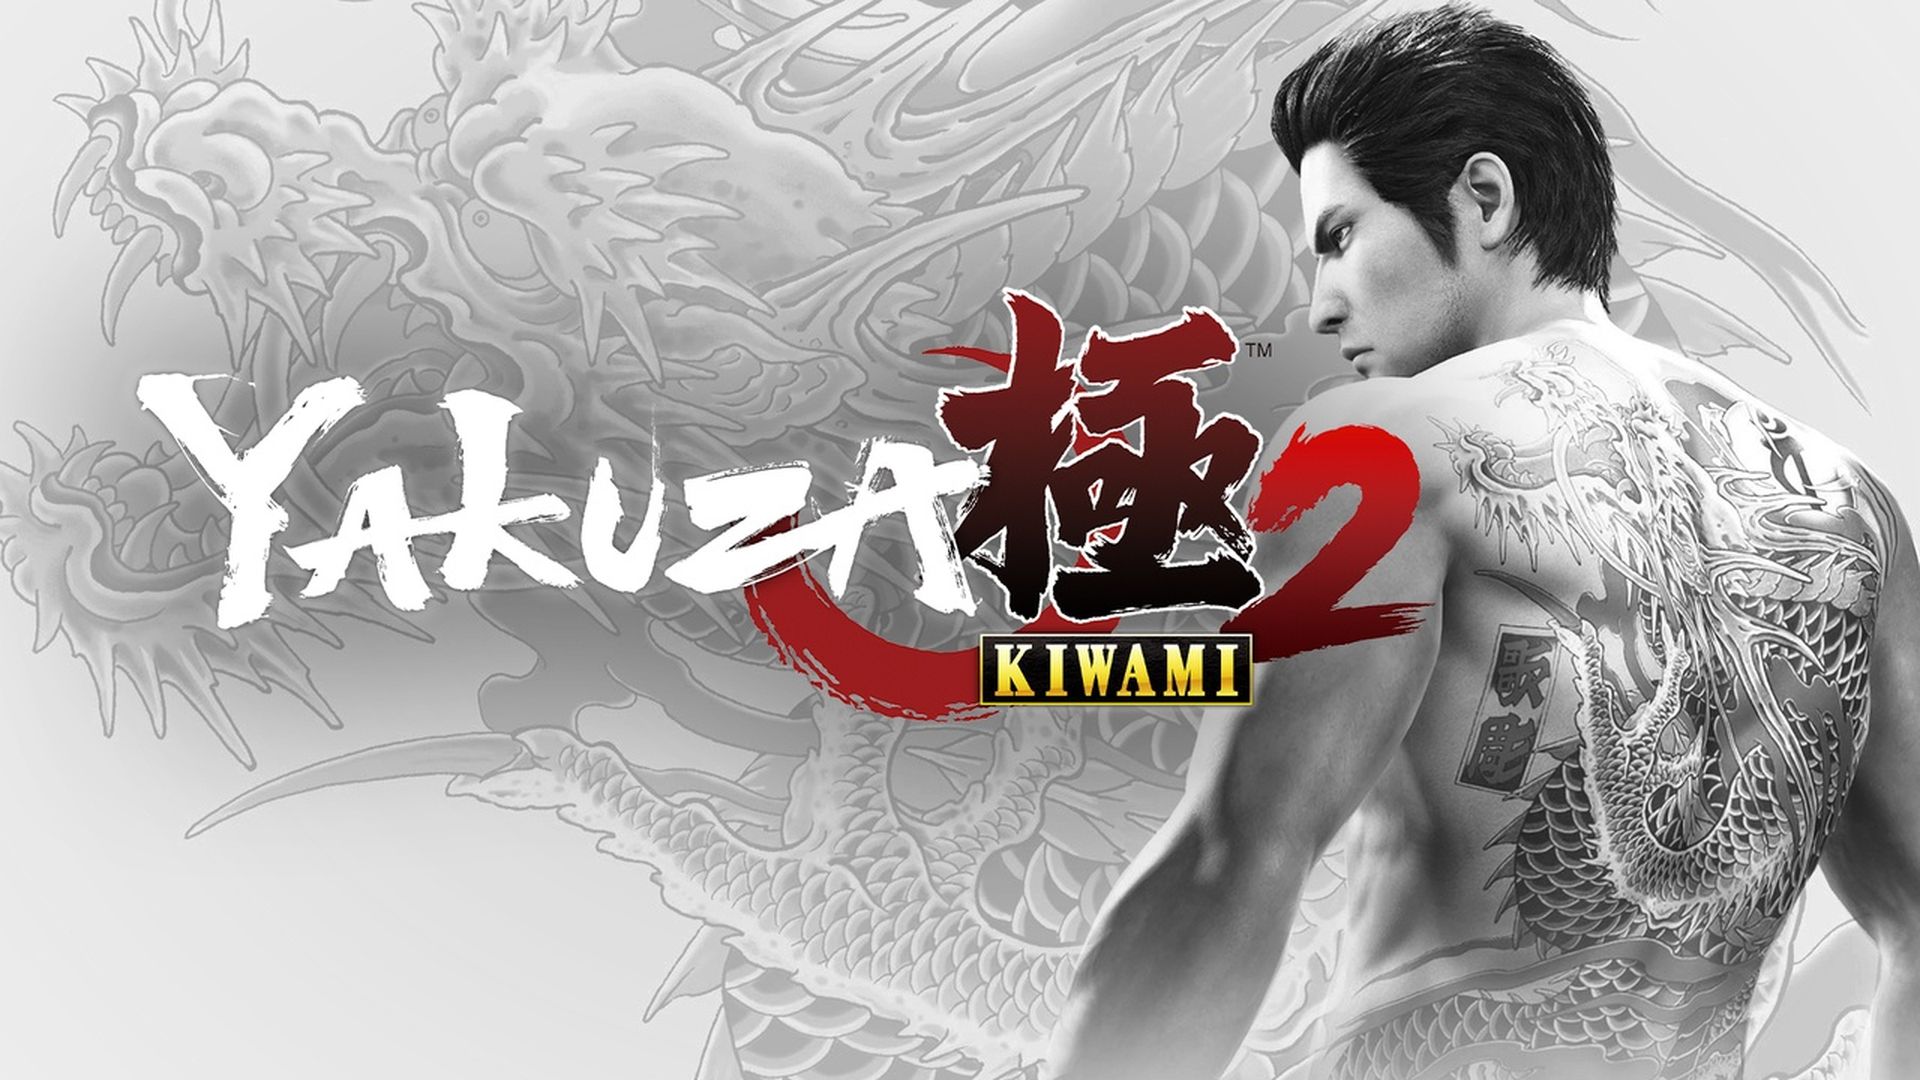 Playstation Plus August 2022 will include some of the most iconic Yakuza series, such as the Kazuma Kiryu saga and most recent installment Yakuza: Like A Dragon. 8 Yakuza games will join the catalog gradually beginning next month.